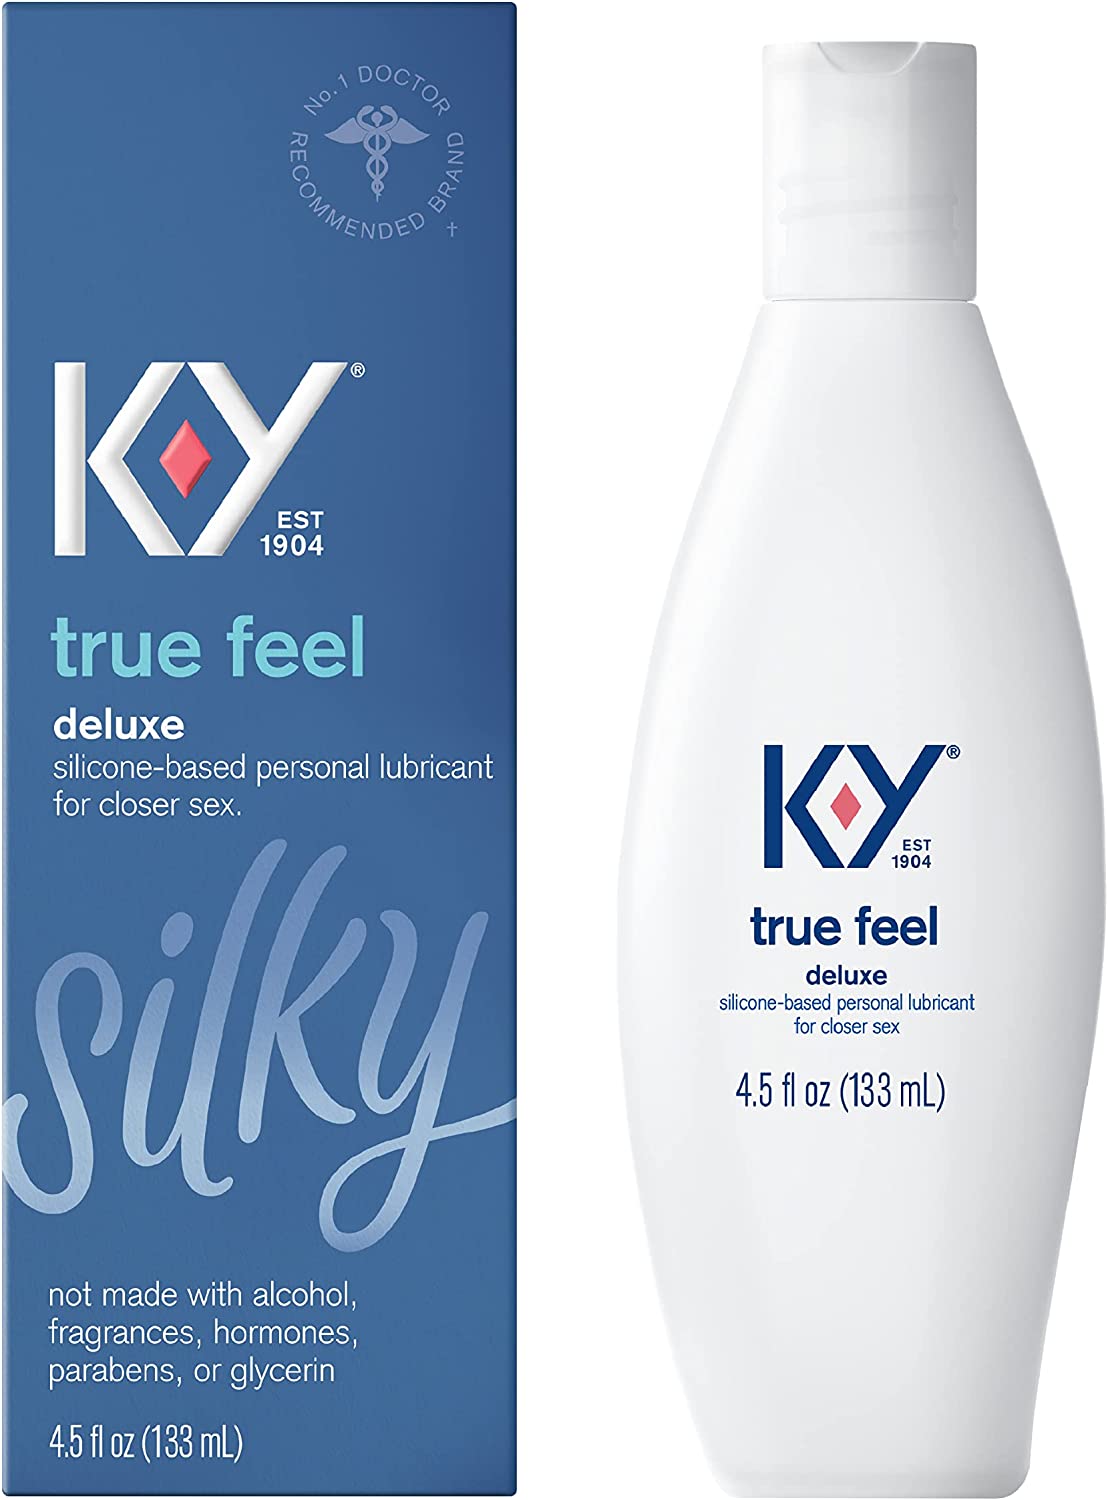 4.5-Oz K-Y True Feel Deluxe Silicone-Based Personal Lubricant $7.42 w/ S&S + Free Shipping w/ Prime or on orders over $35